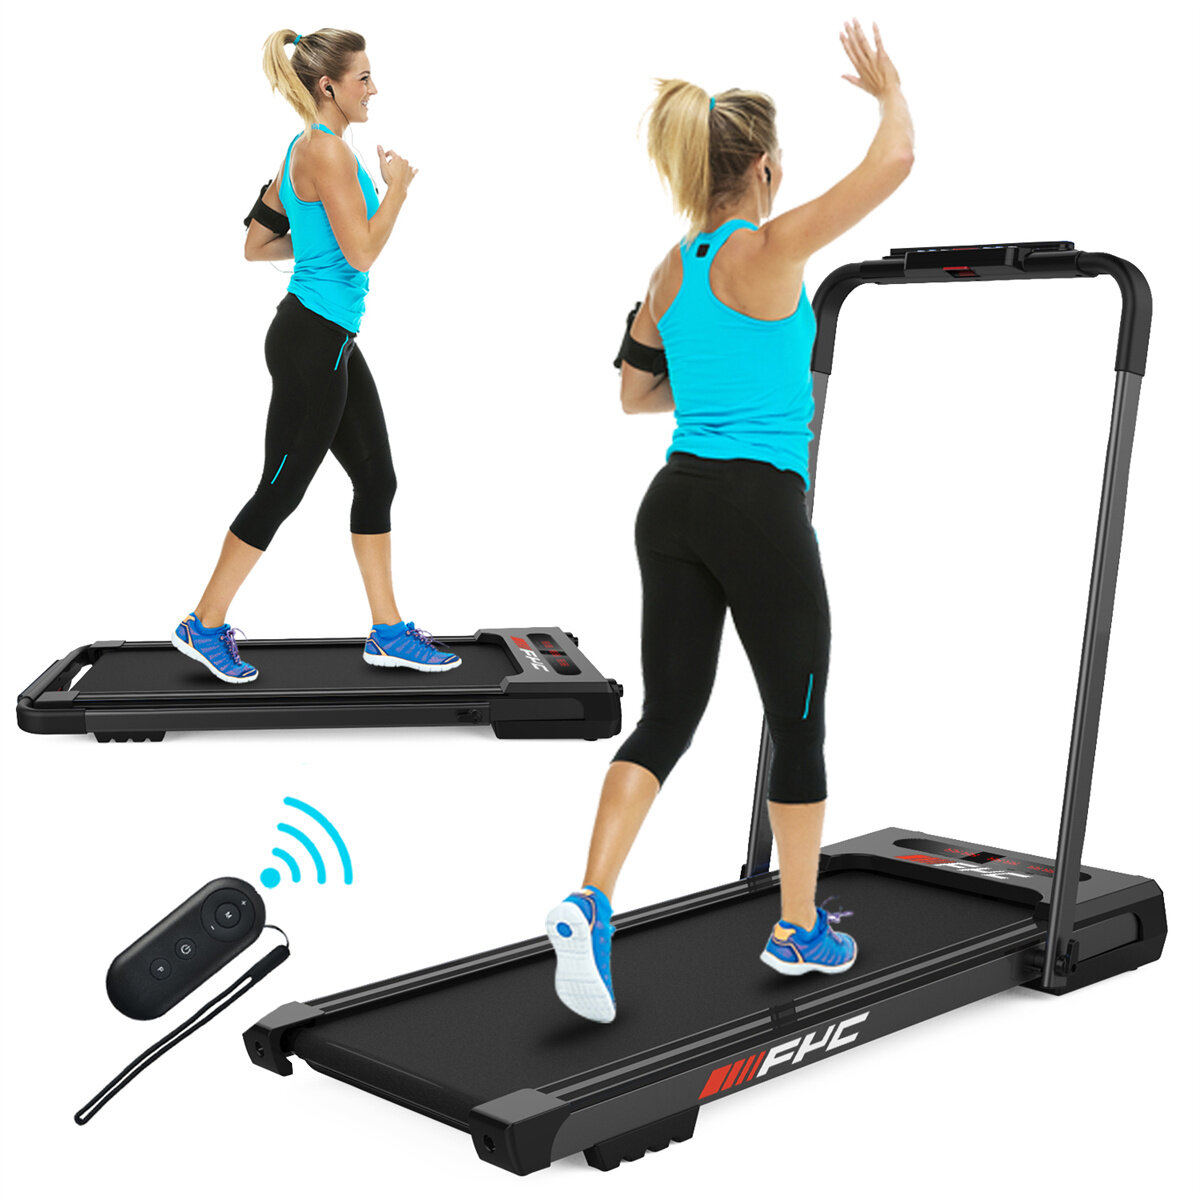 

[USA Direct] FYC JK31-8A 2 in 1 Folding Walking Treadmill 2.5HP Power 12km/h Max Speed 140kg Weight Capacity Remote Cont